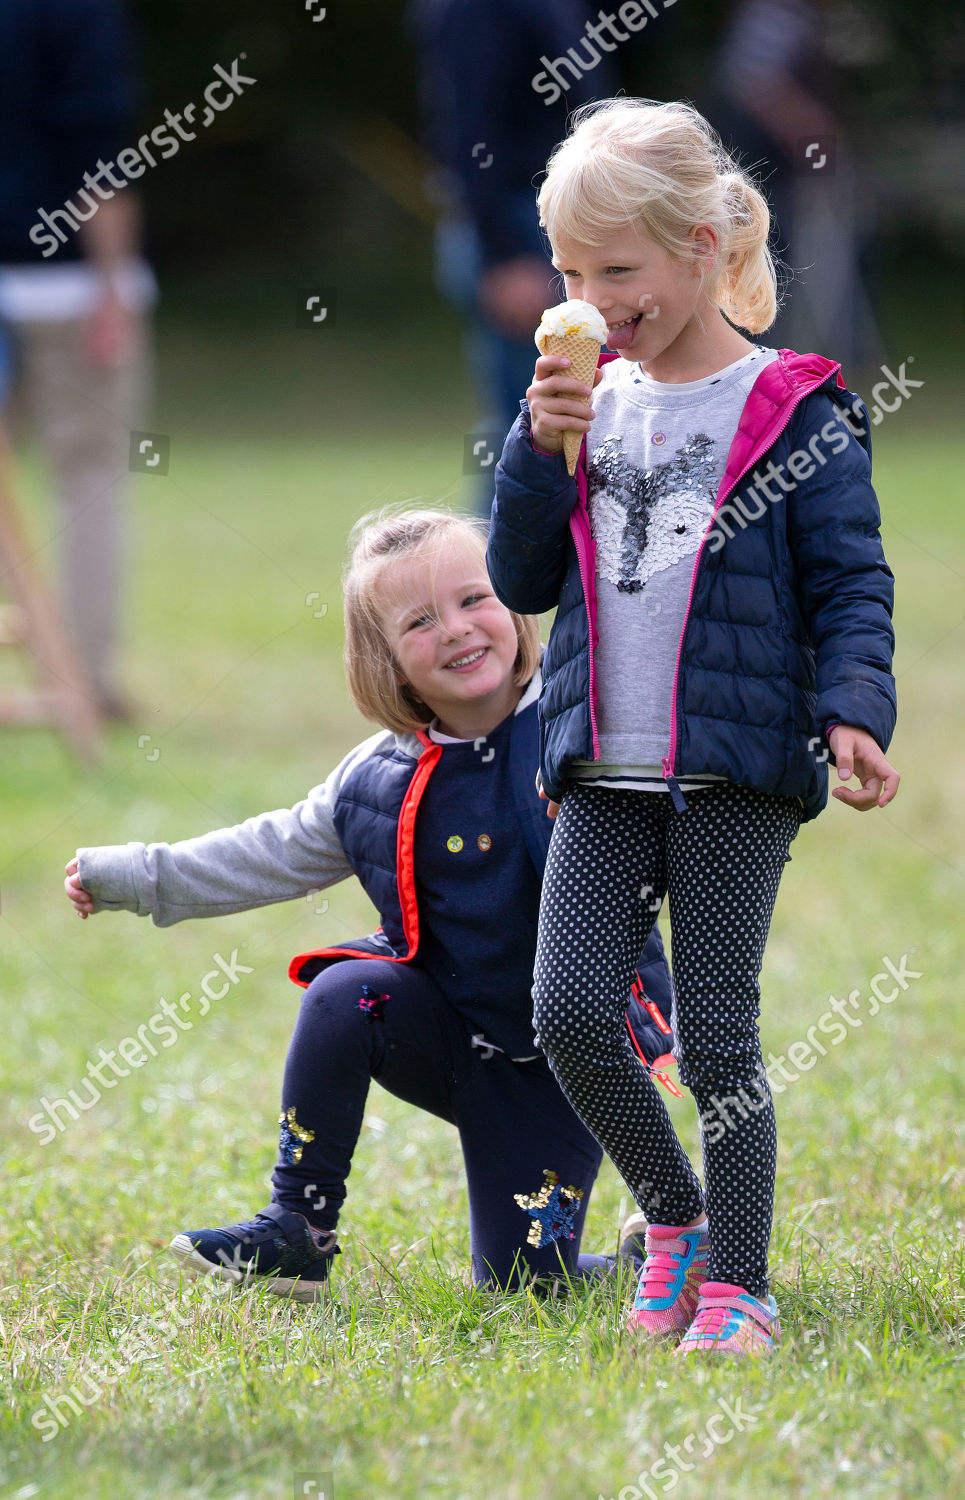 whately-manor-international-horse-trials-at-gatcombe-park-gloucestershire-uk-shutterstock-editorial-9877099n.jpg